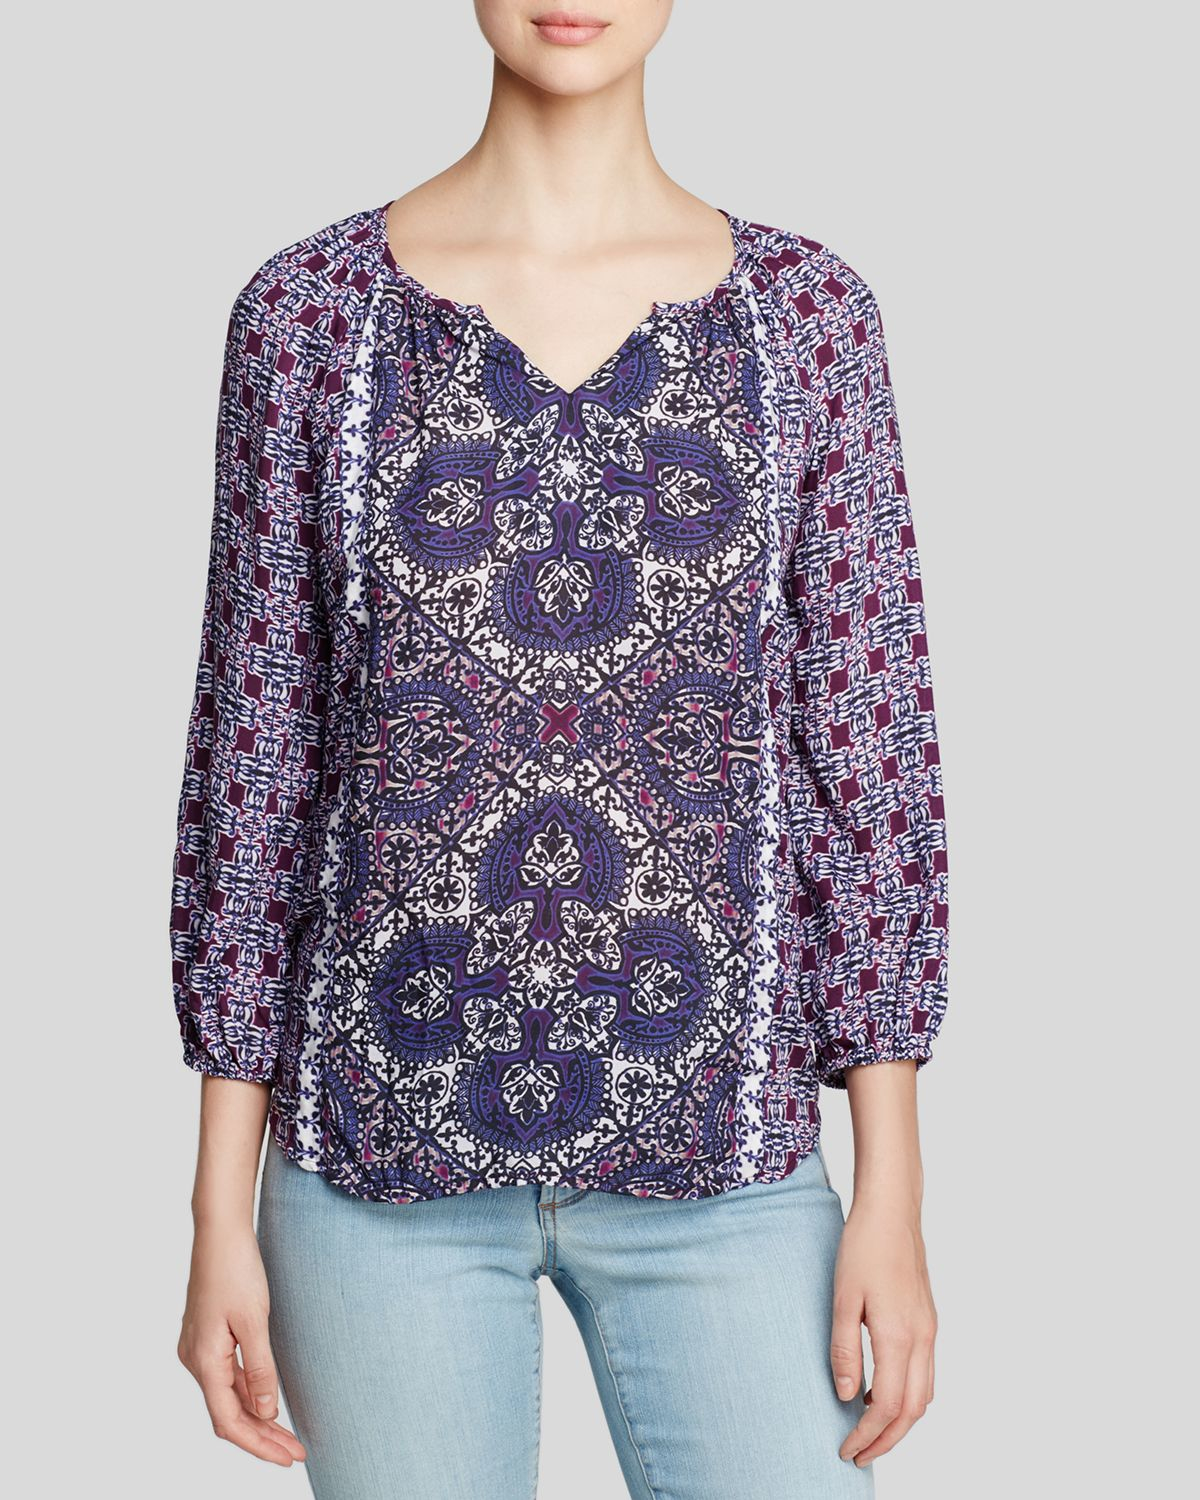 Lyst - Beach lunch lounge Arianna Peasant Blouse in Purple